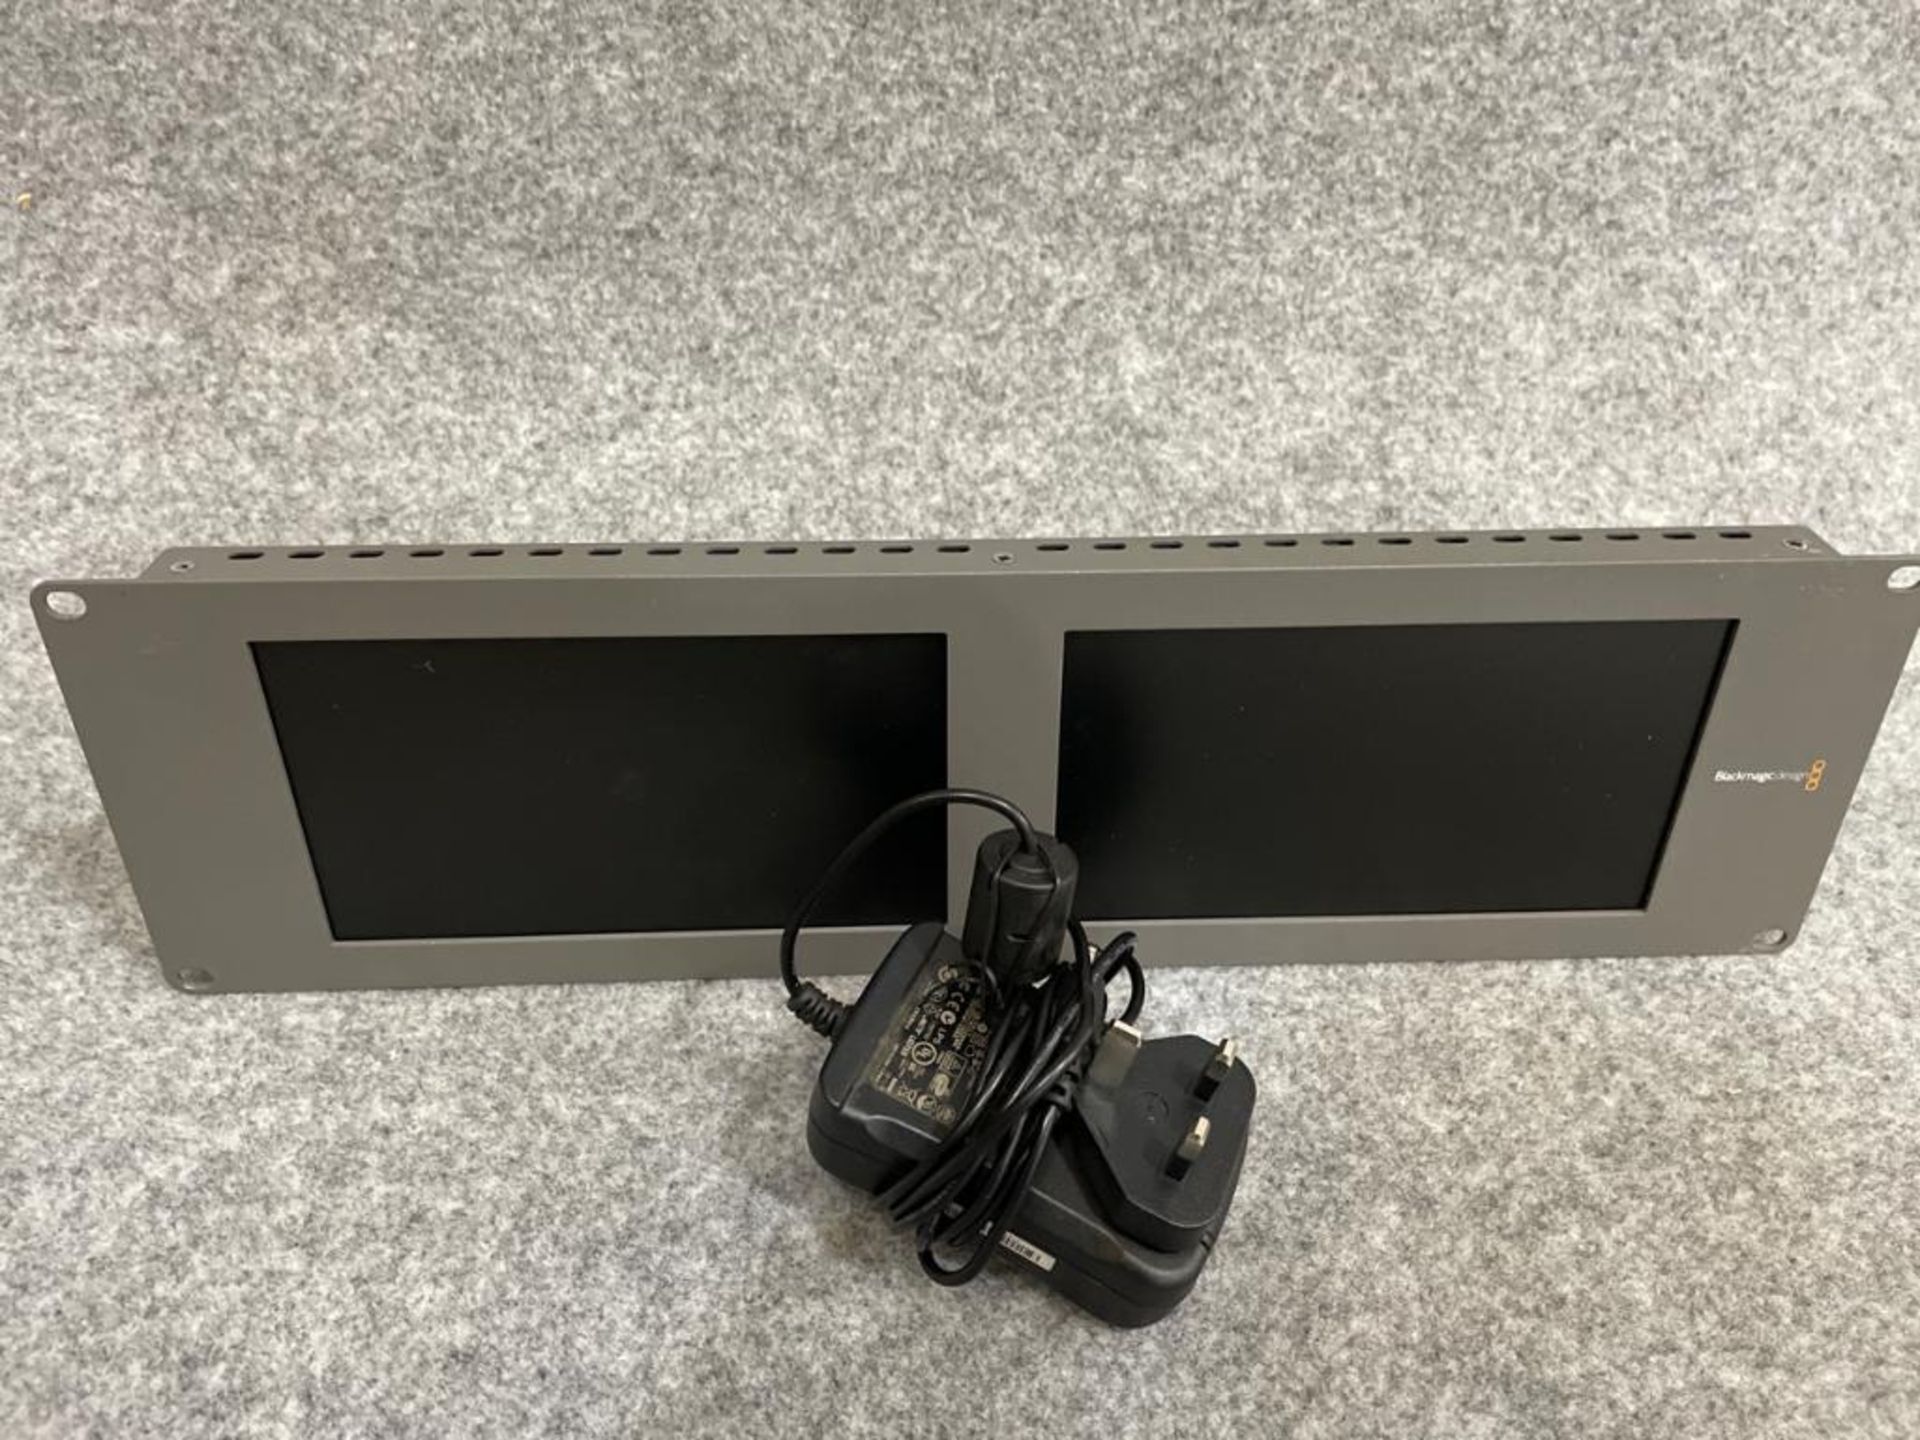 BlackMagic Dual HD Monitor with power supply SN:1391251 - Image 3 of 3